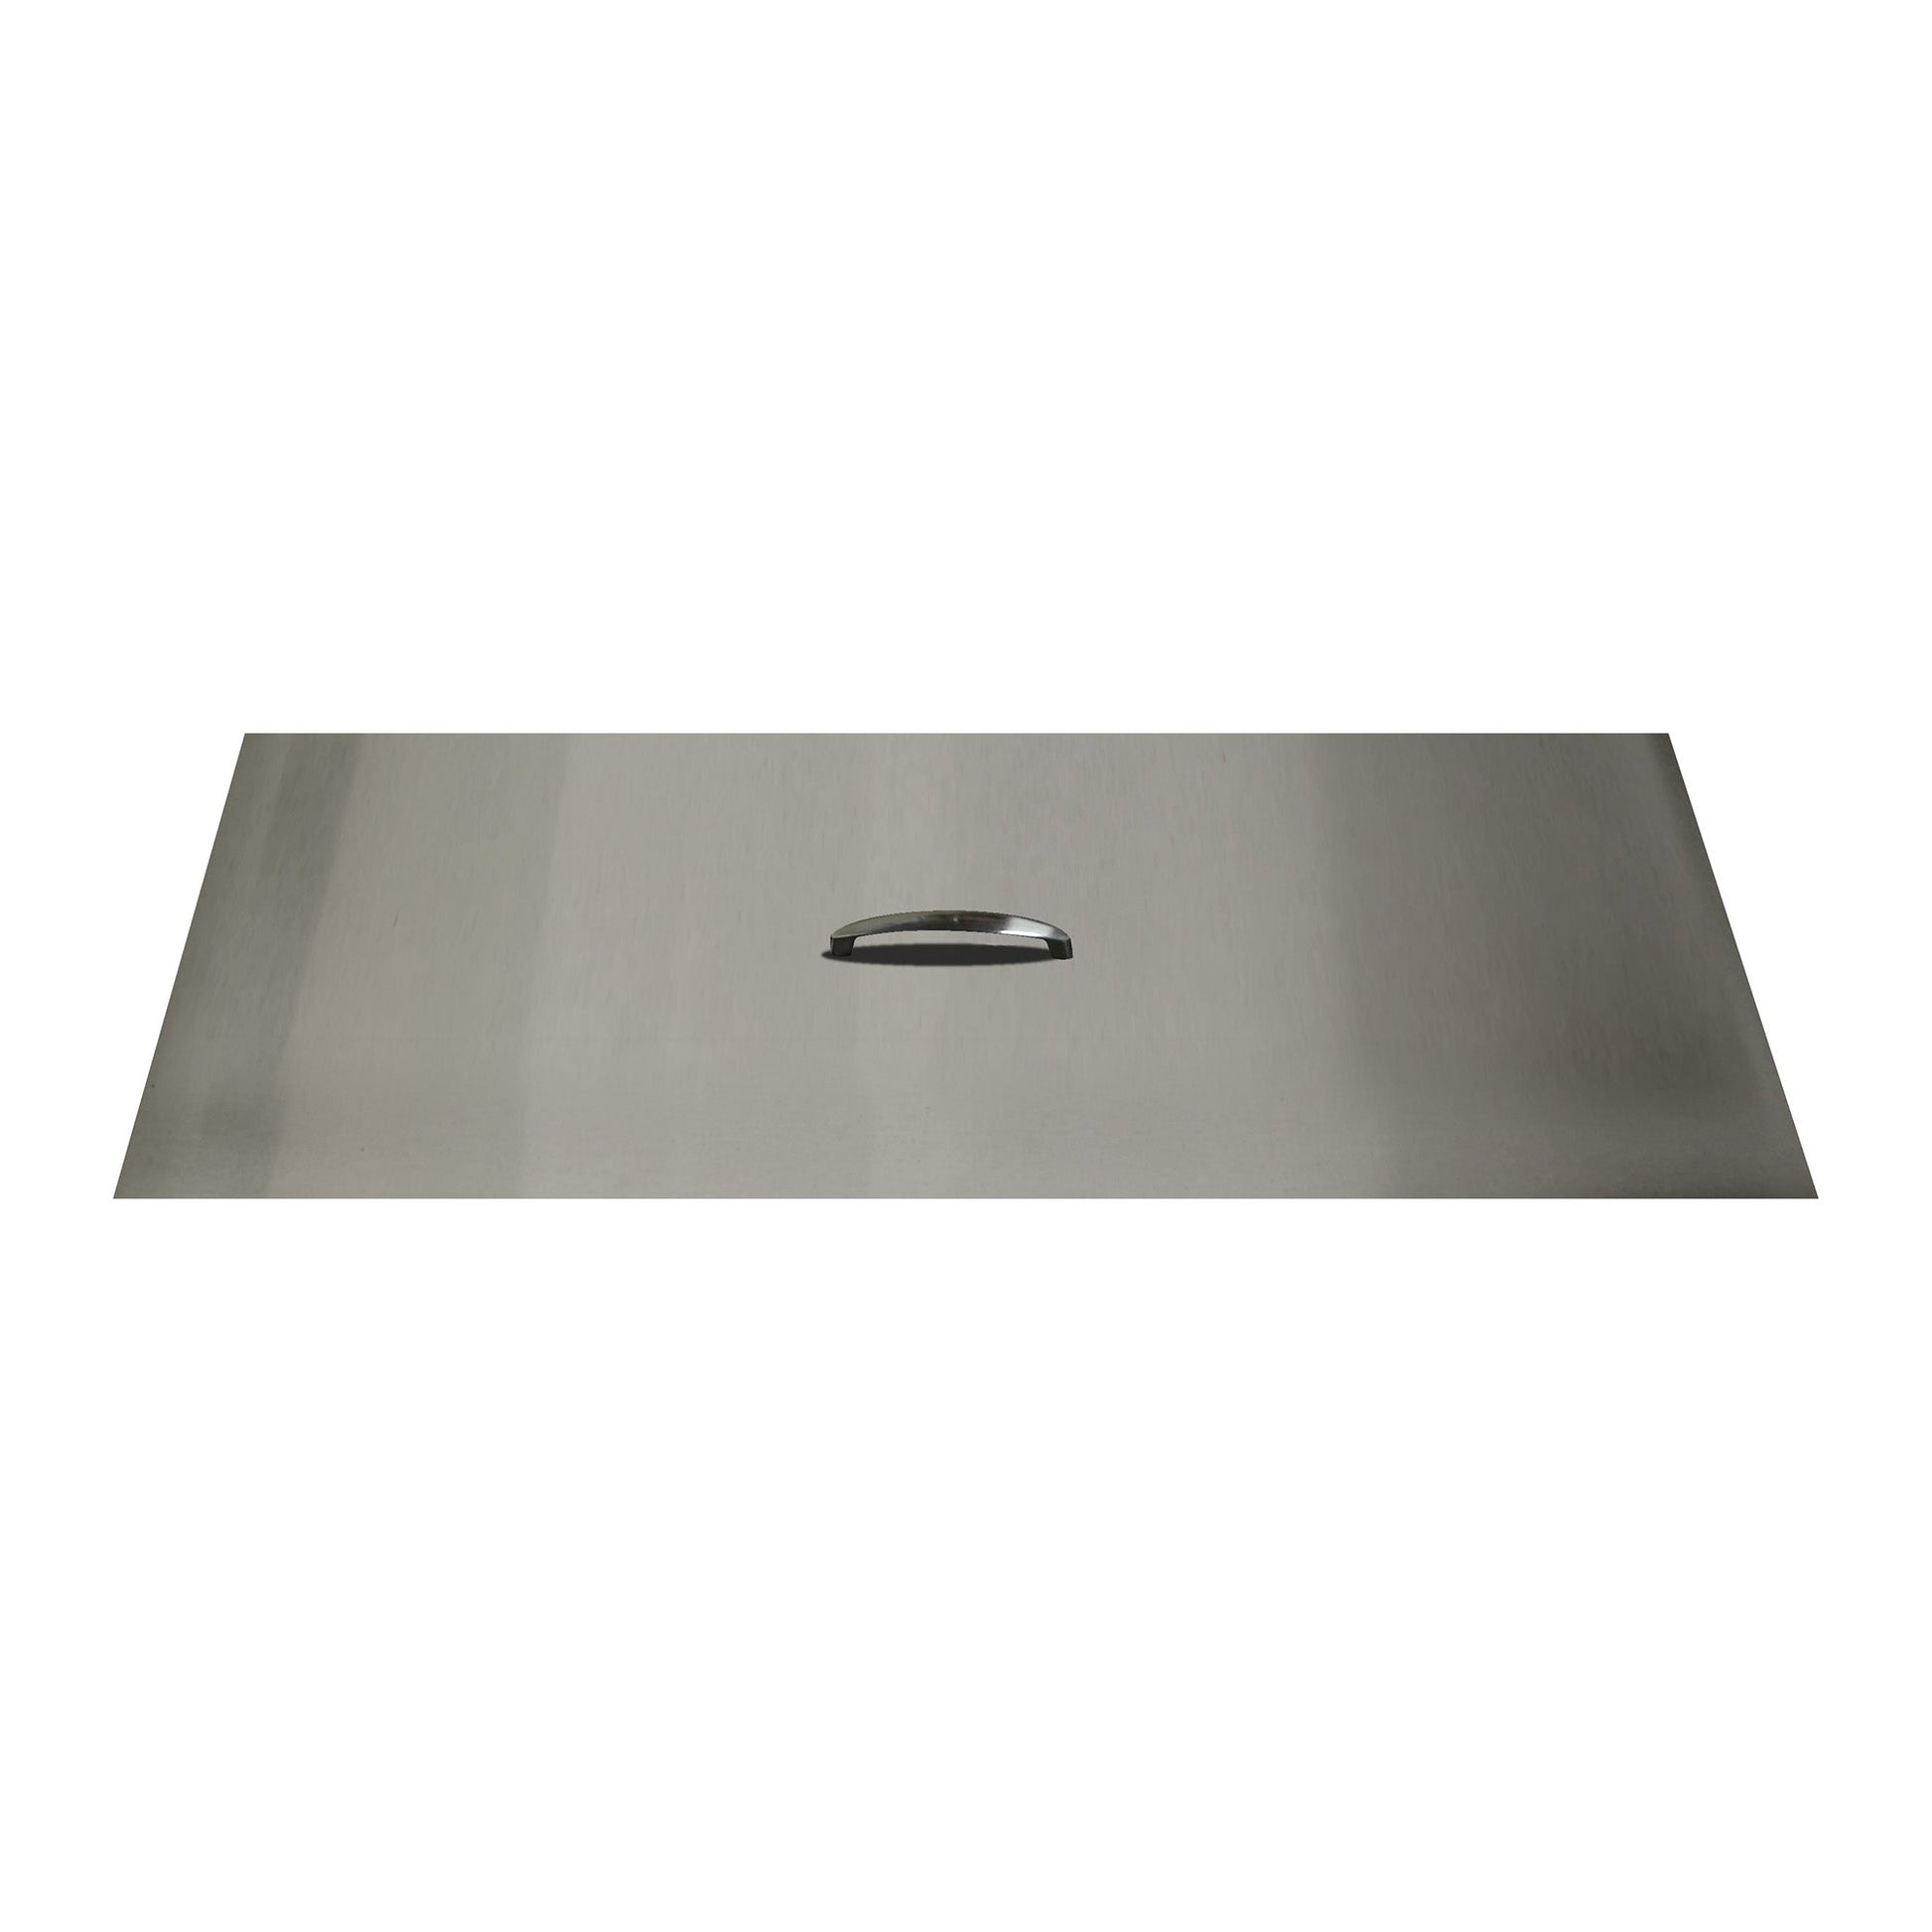 The Outdoor Plus 16" x 40" Stainless Steel Rectangular Fire Pit Lid Cover